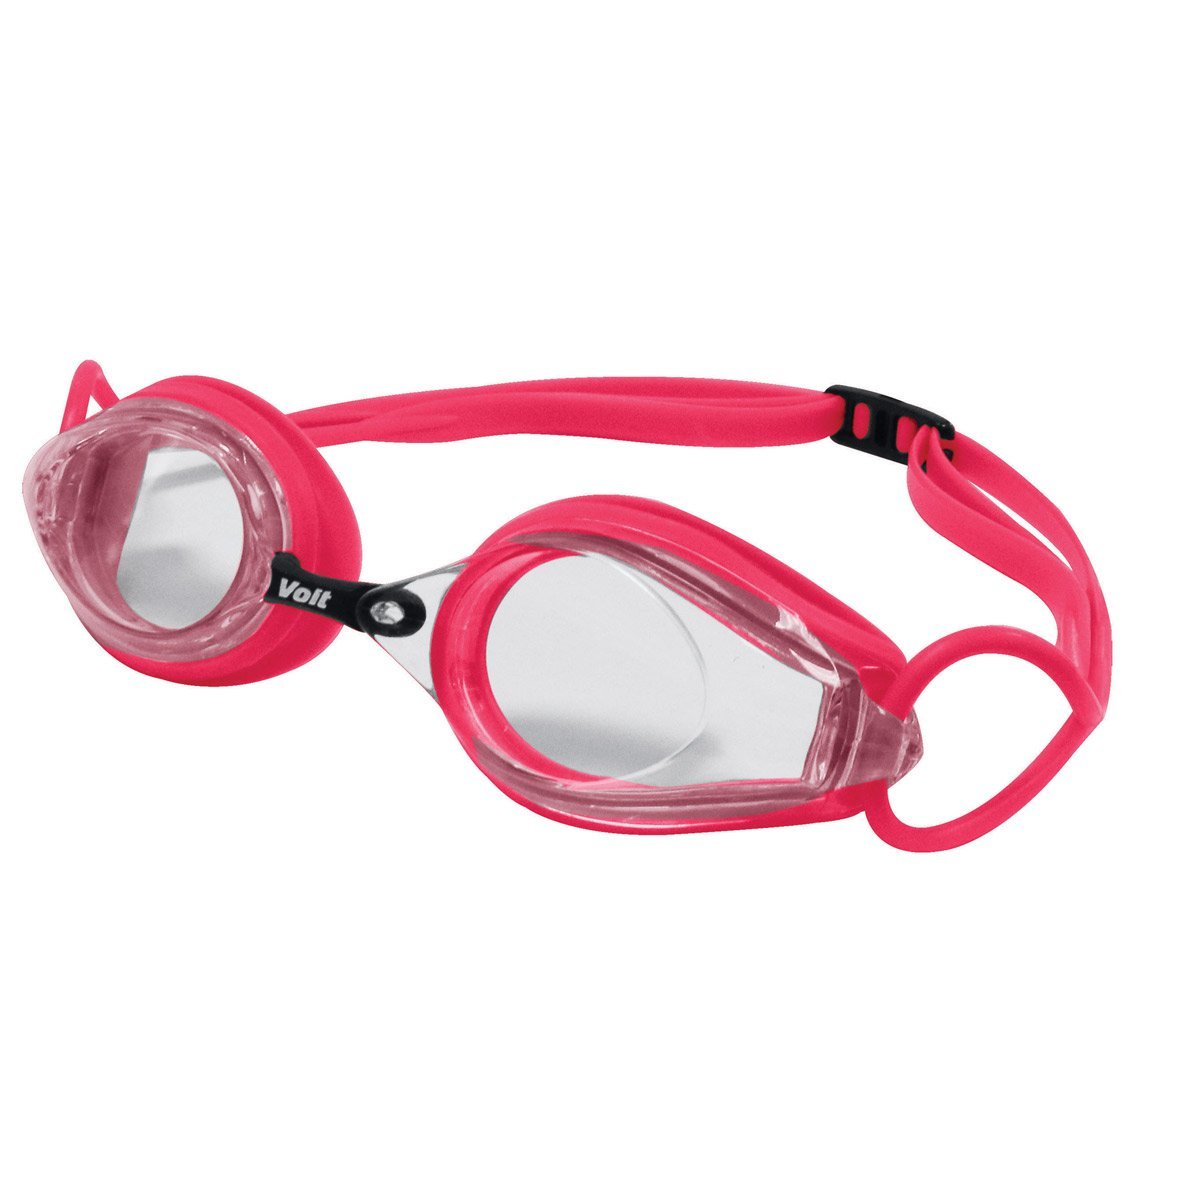 Goggle Voit Twister